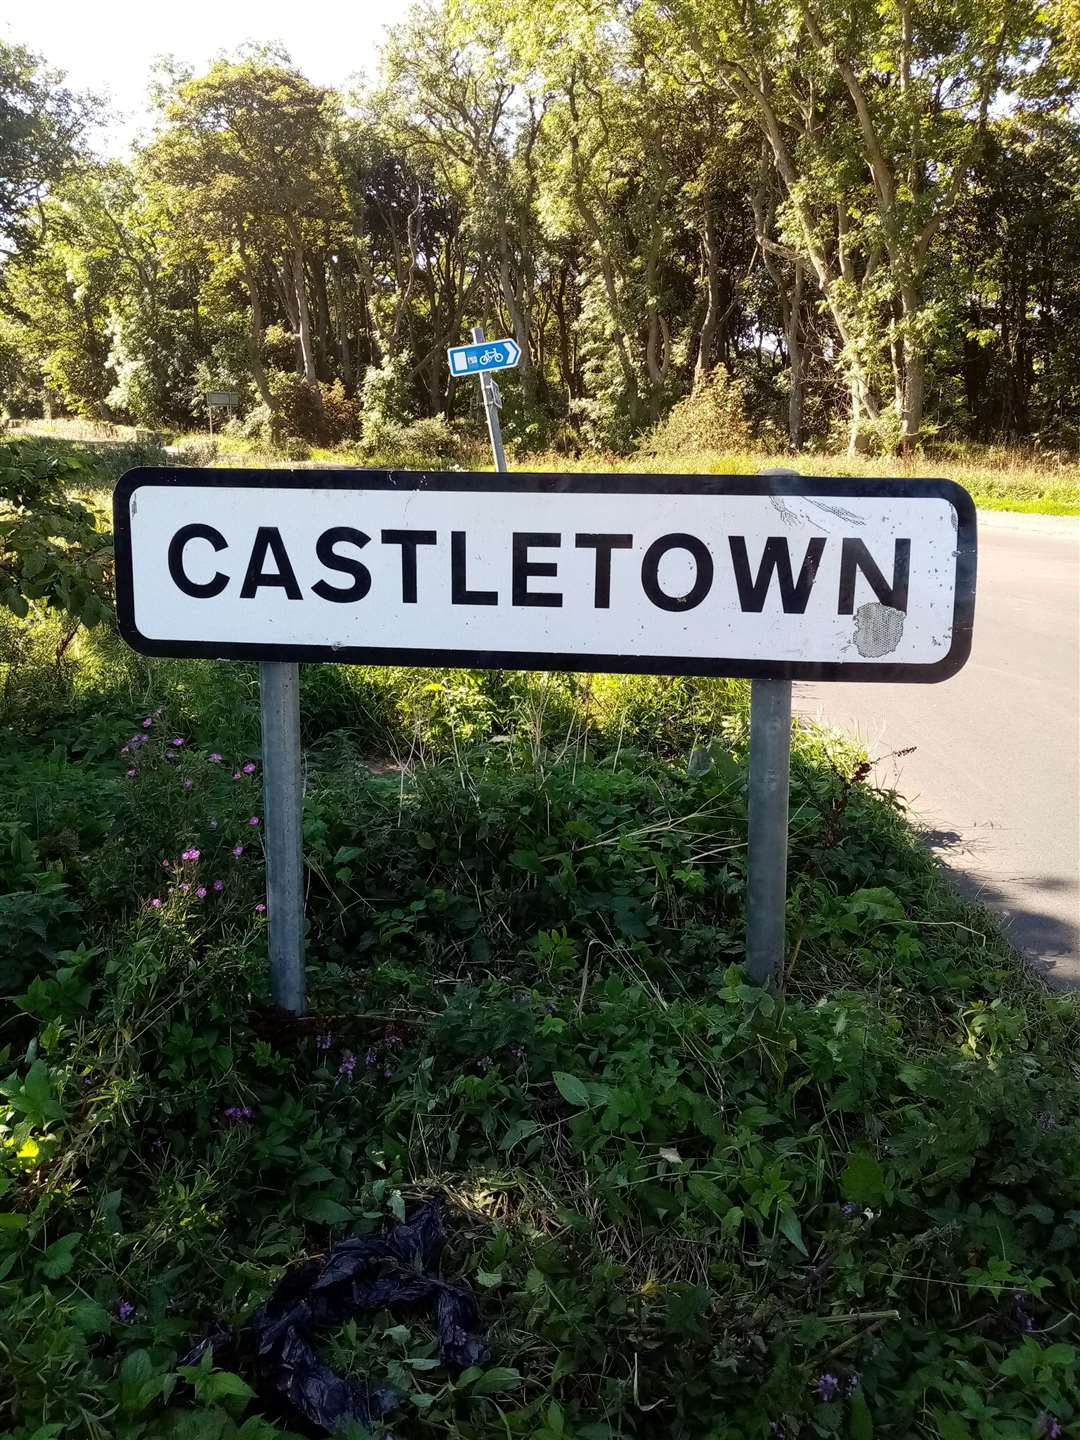 Anti-social behaviour in Castletown is concerning local community councillors